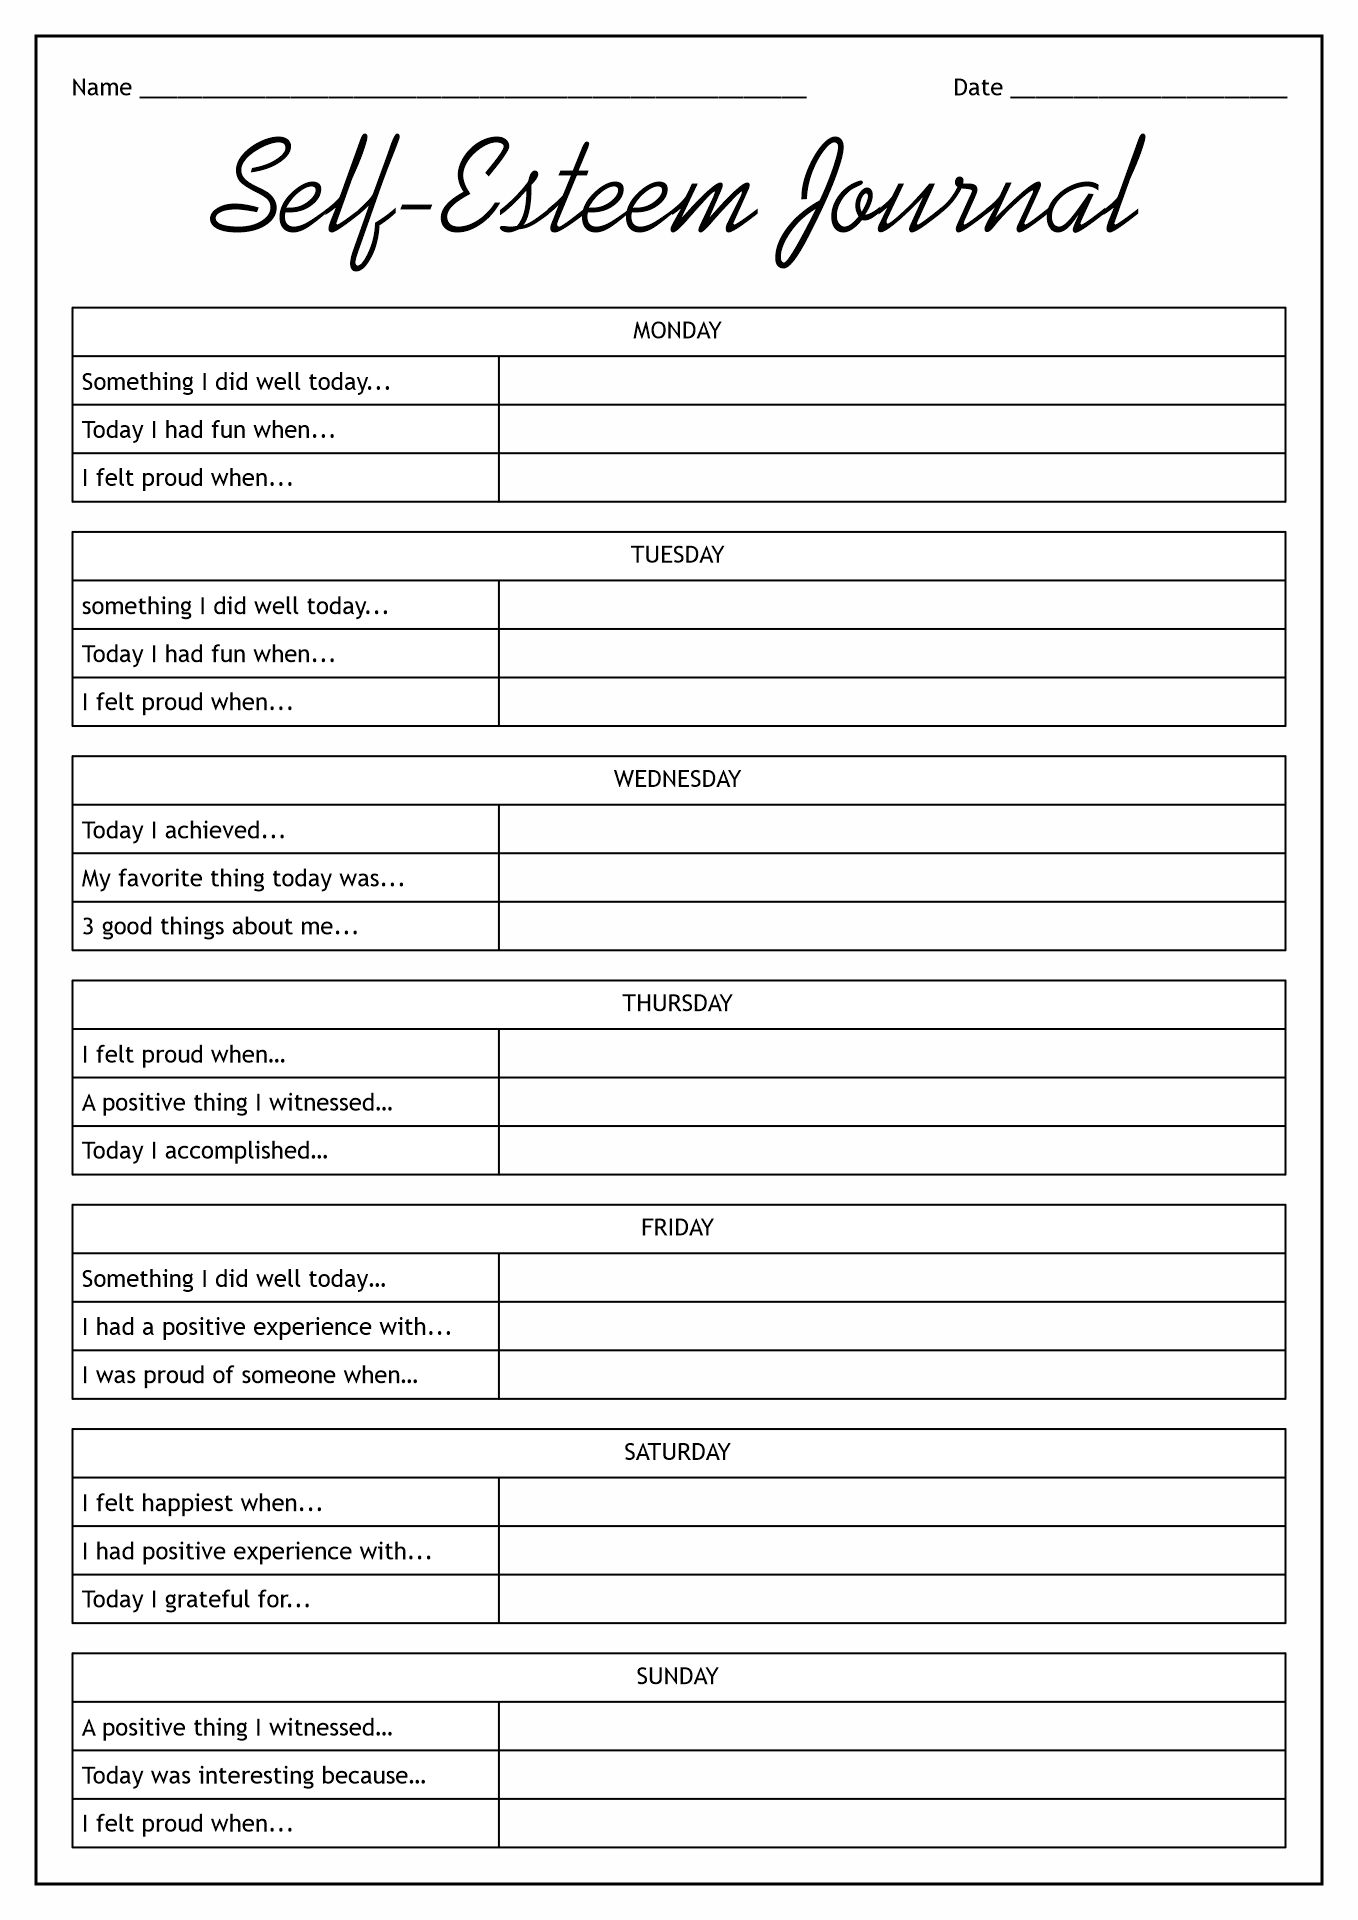 16-best-images-of-positive-self-talk-worksheets-positive-thinking